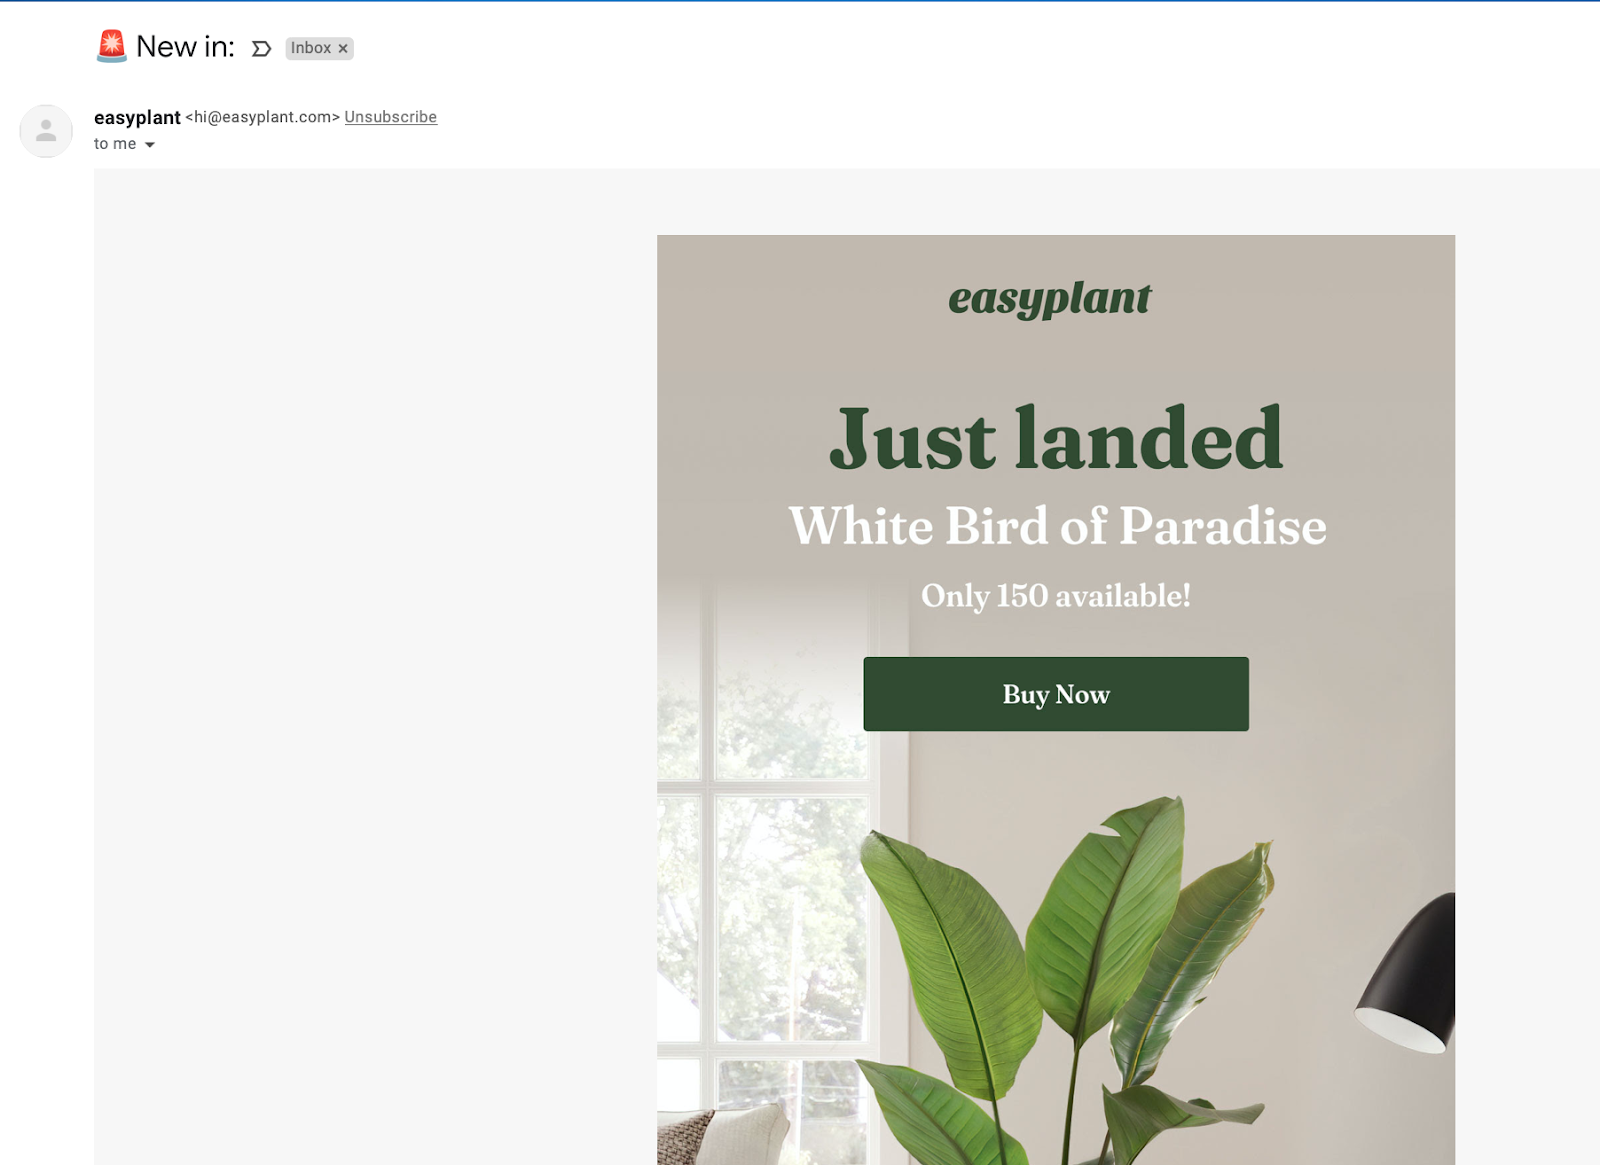 easyplant email example